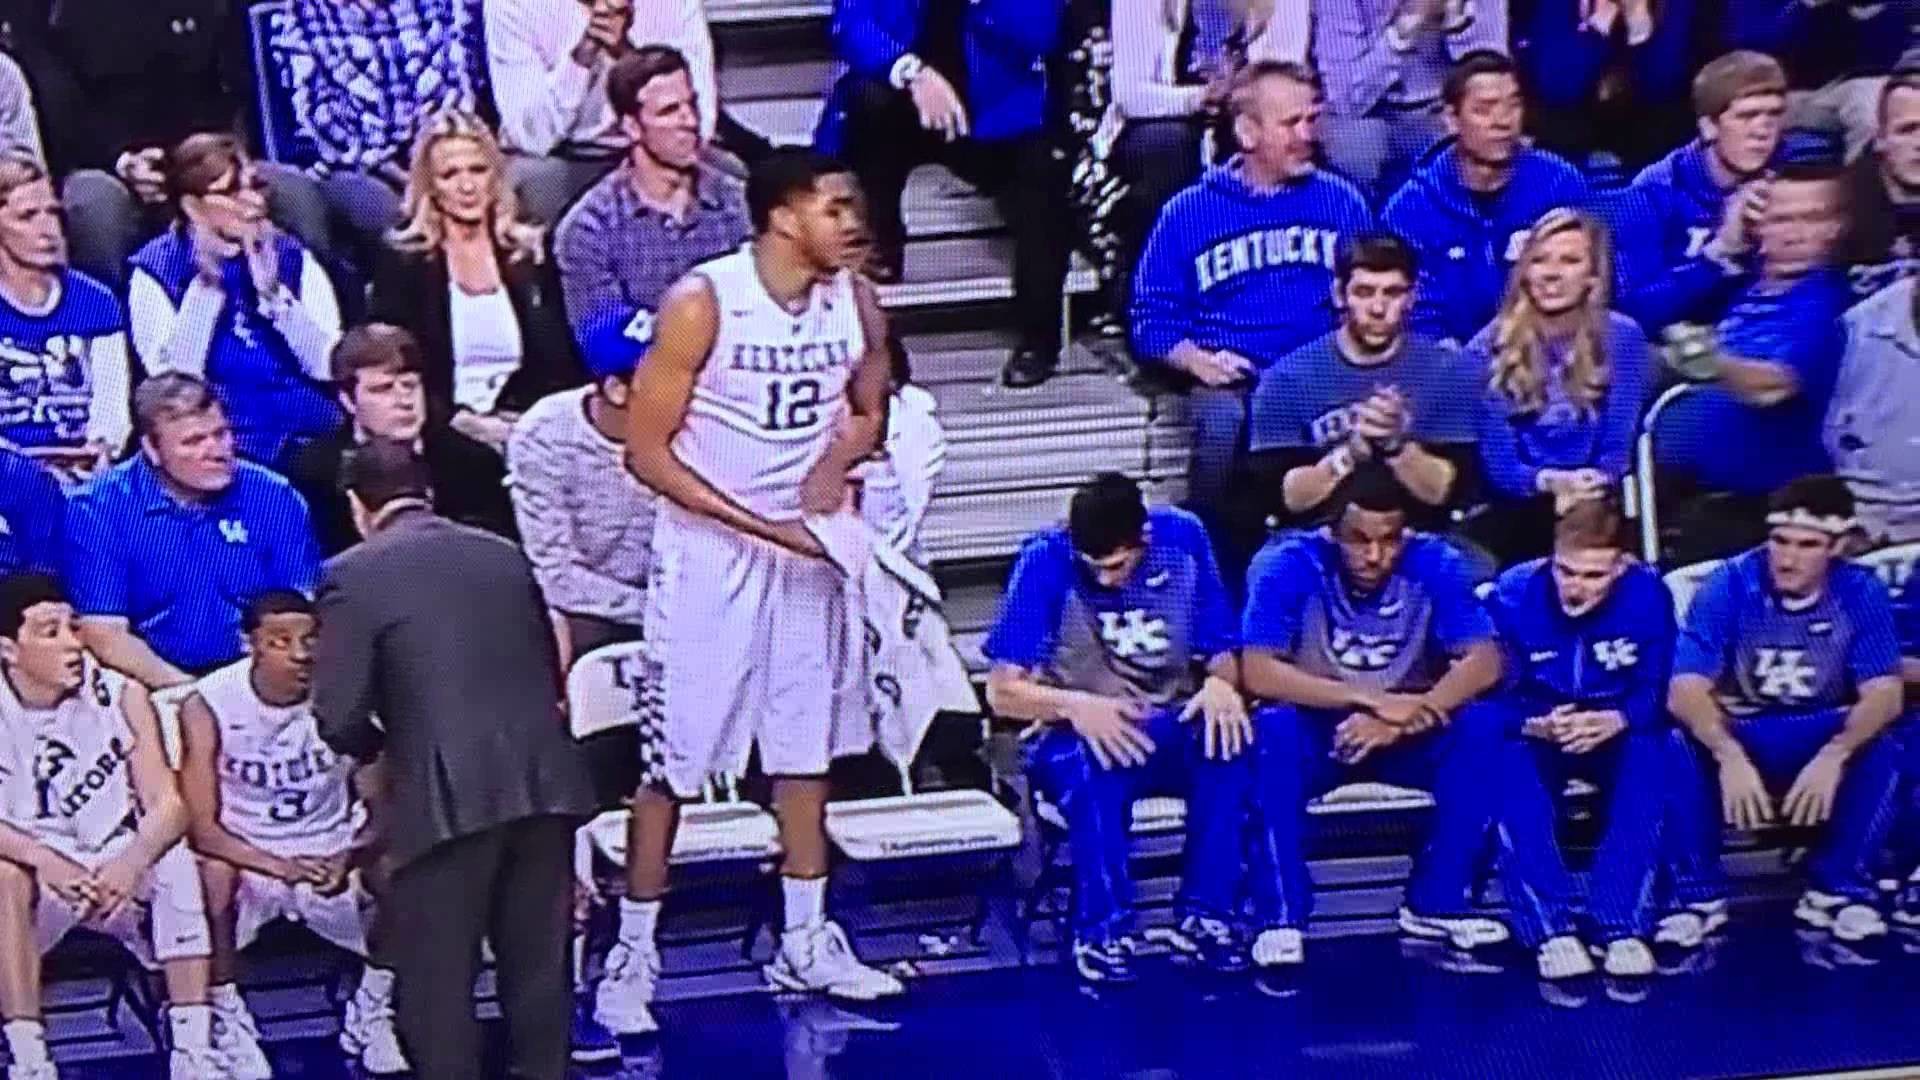 1920x1080 Karl-Anthony Towns wipes off Willie Cauley-Stein's face. All smiles.